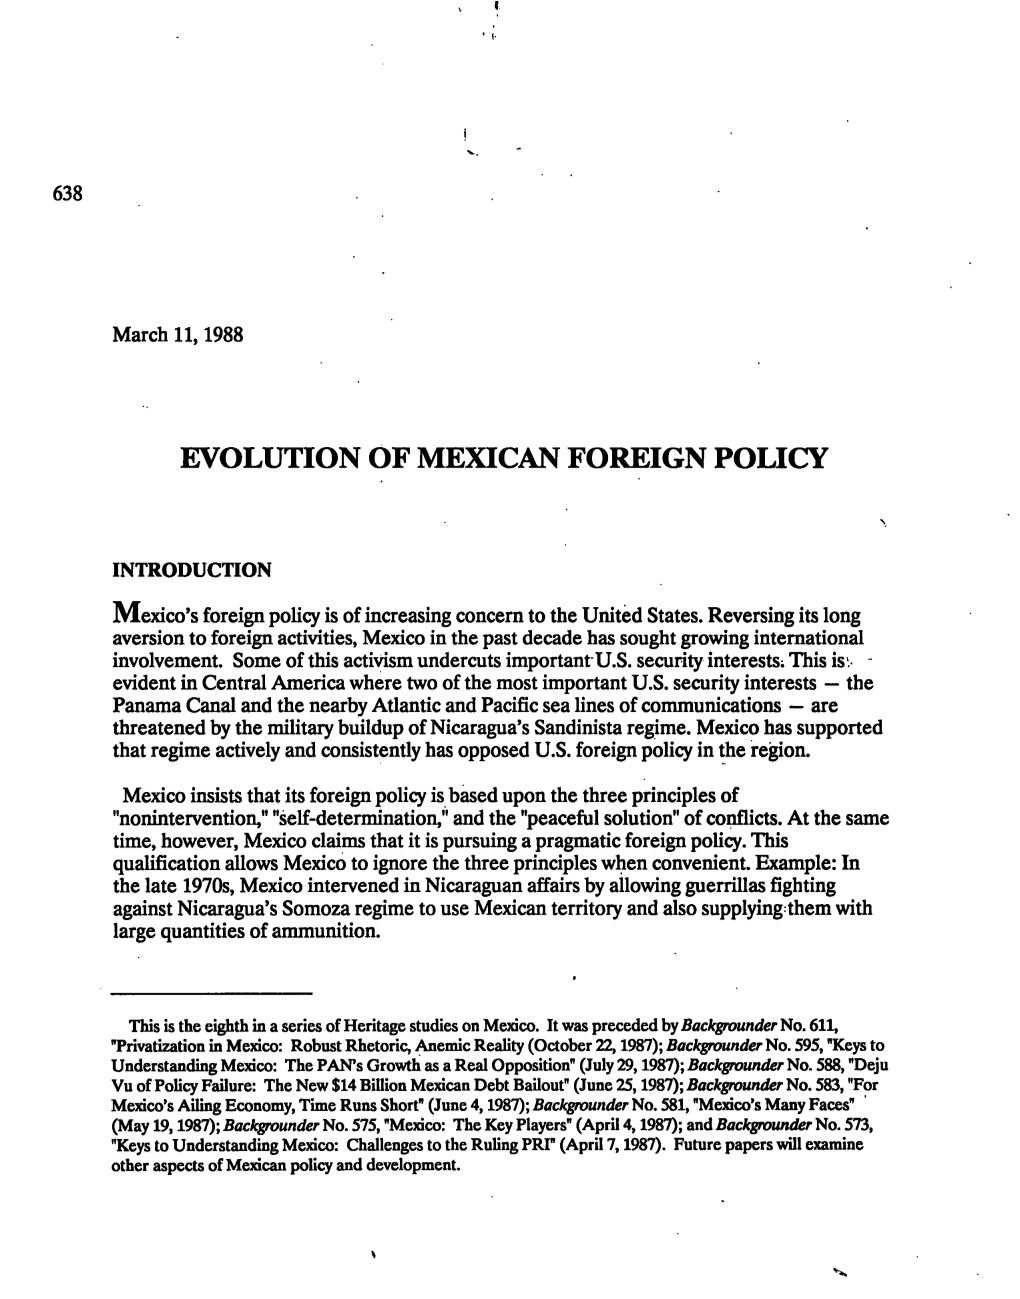 Evolution of Mexican Foreign Policy